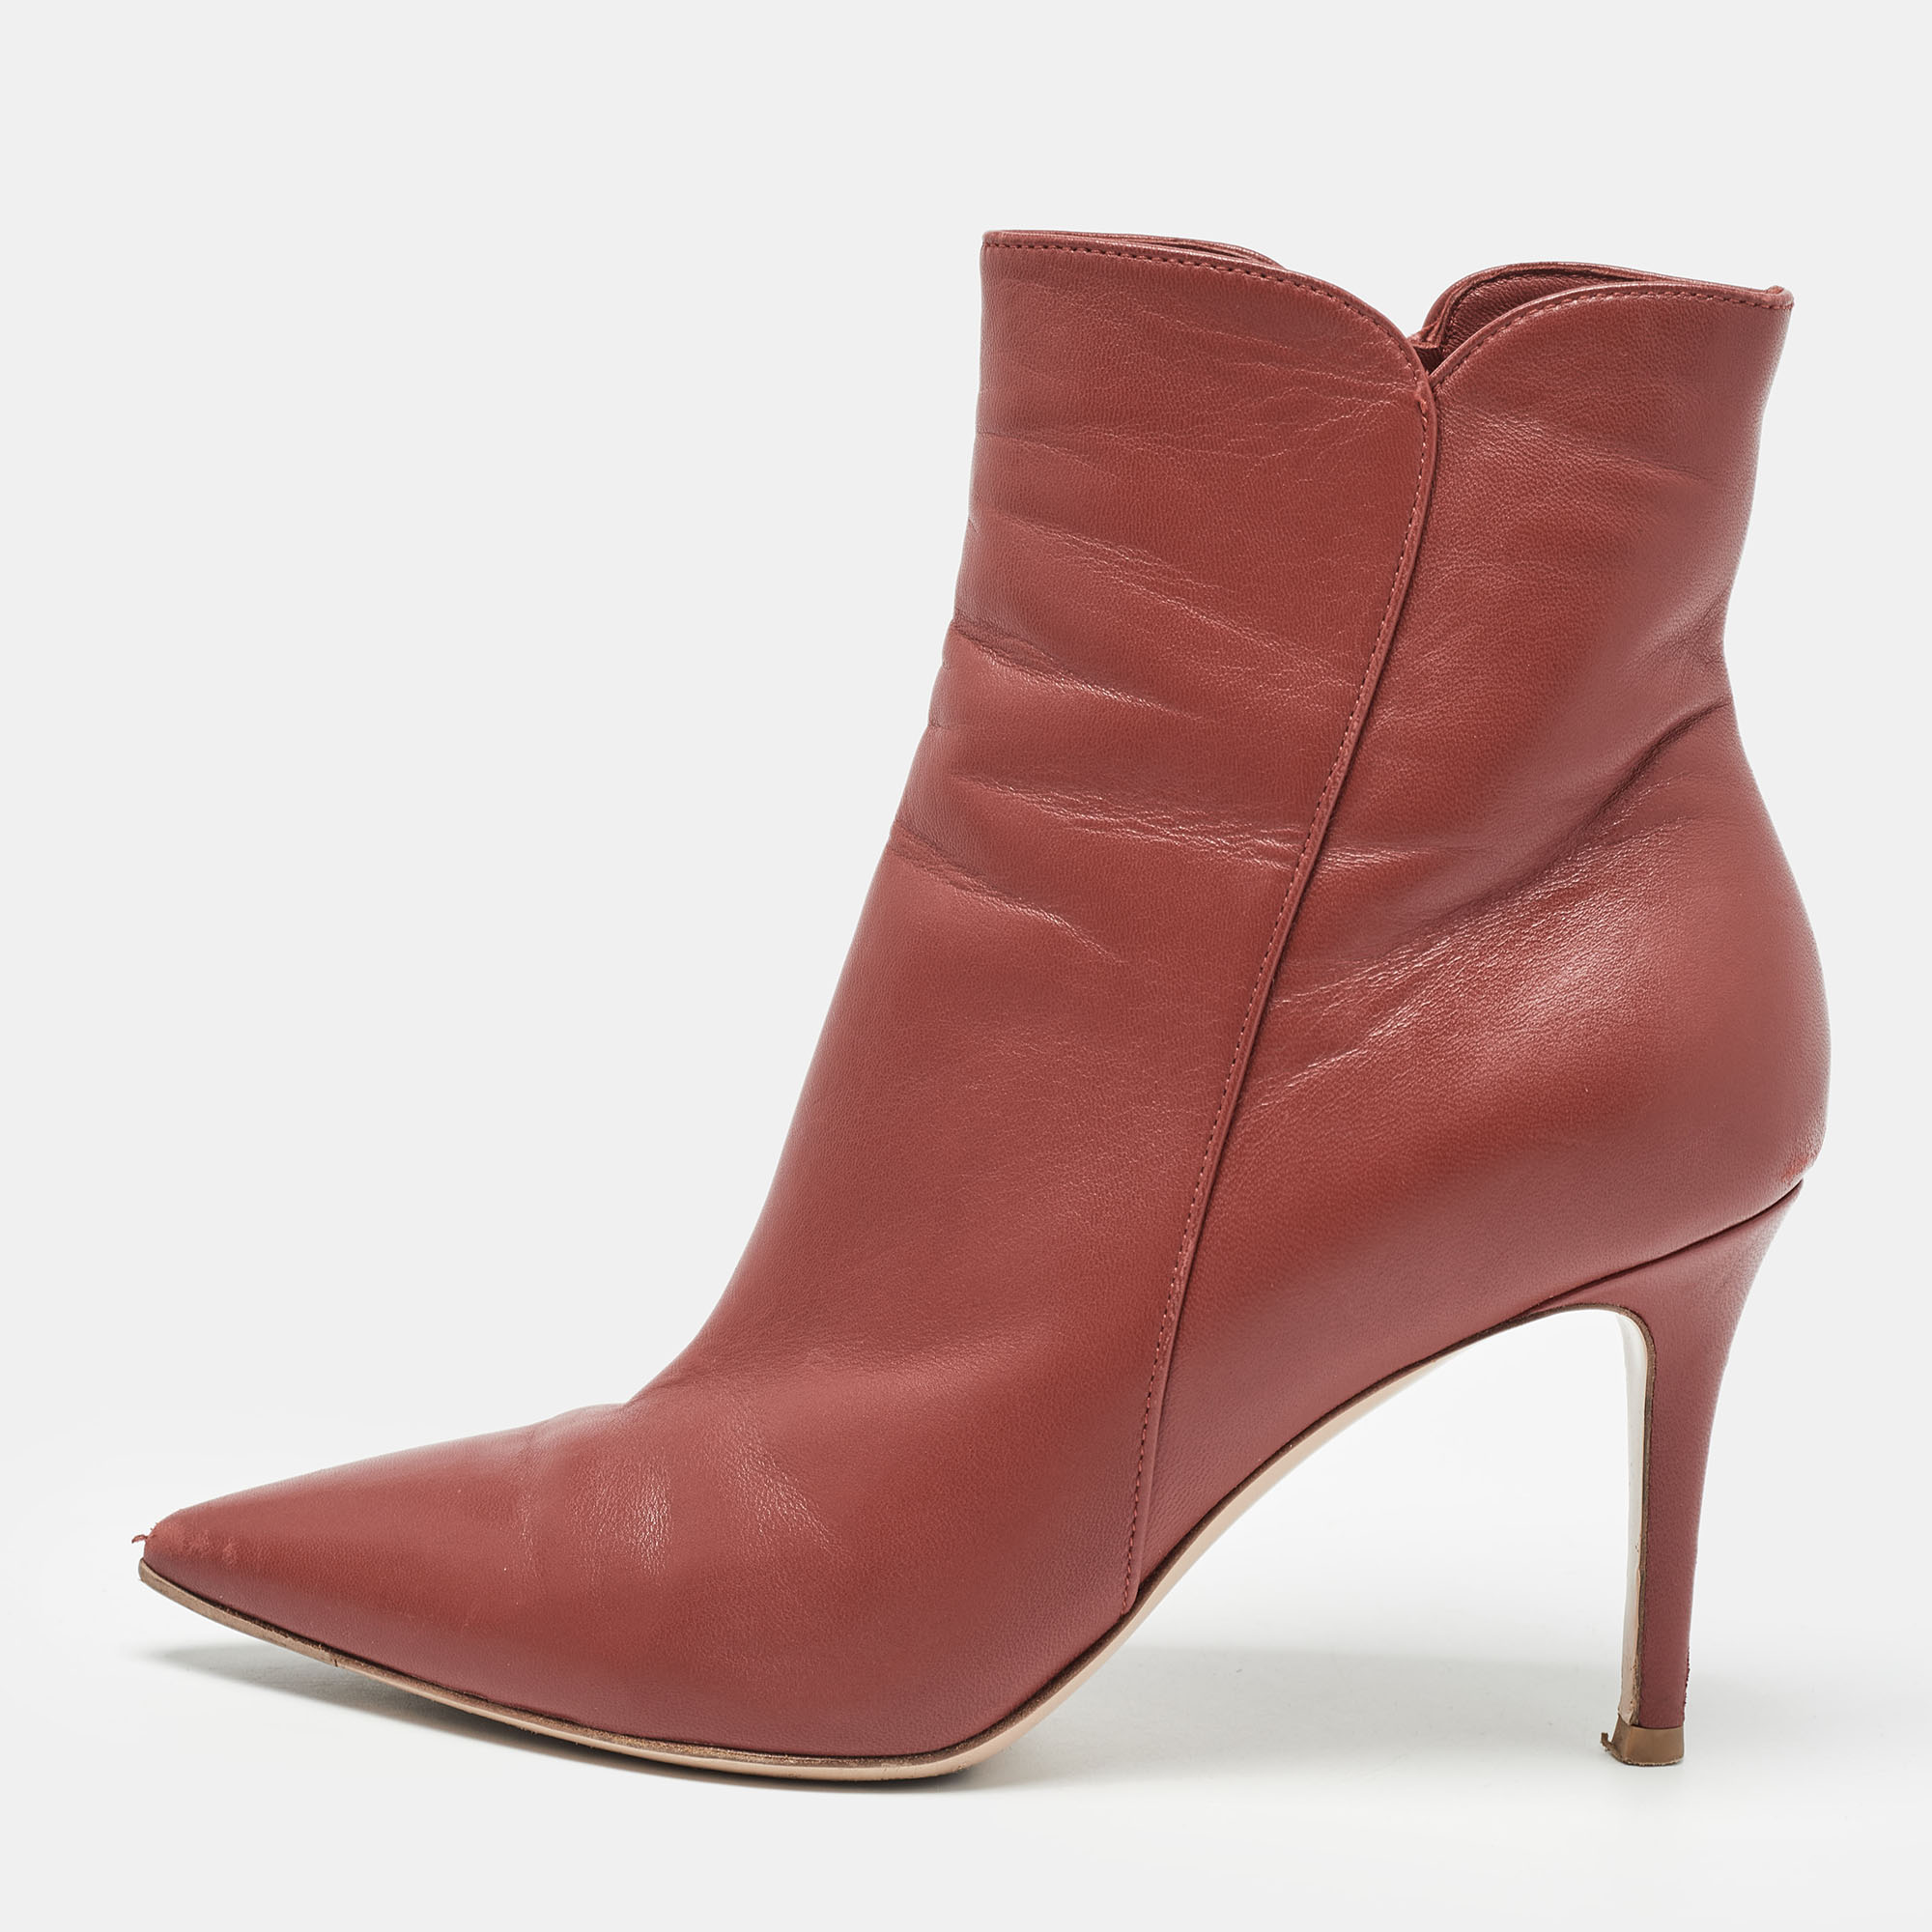 Pre-owned Gianvito Rossi Red Leather Levy Ankle Booties Size 36